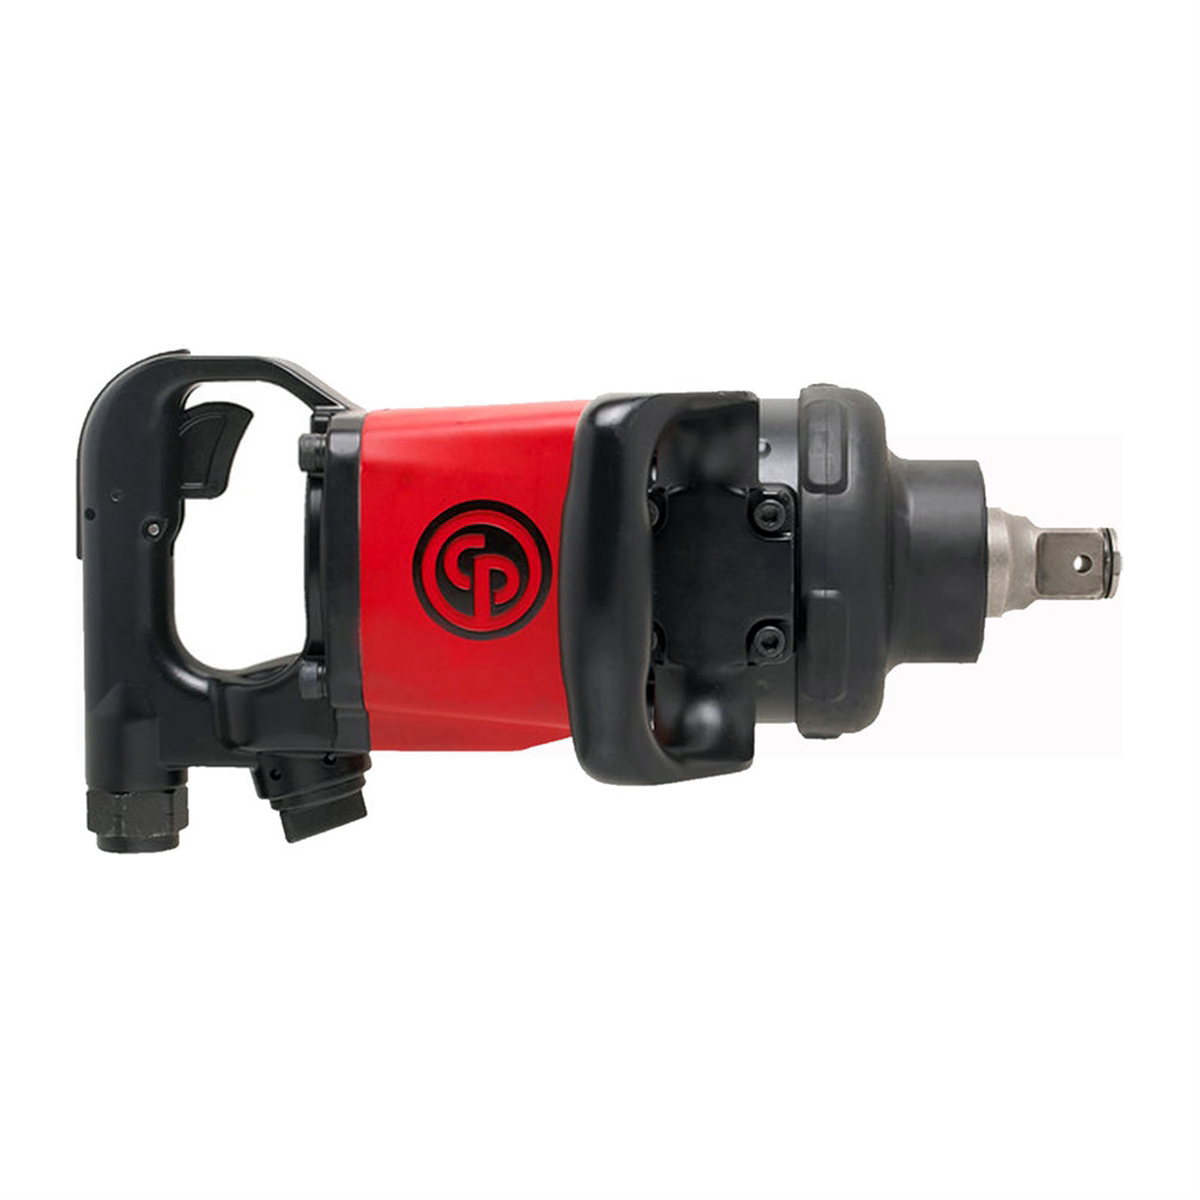 1 Inch Drive Heavy Duty Air Impact Wrench 2140 ft-lbsMax Reverse